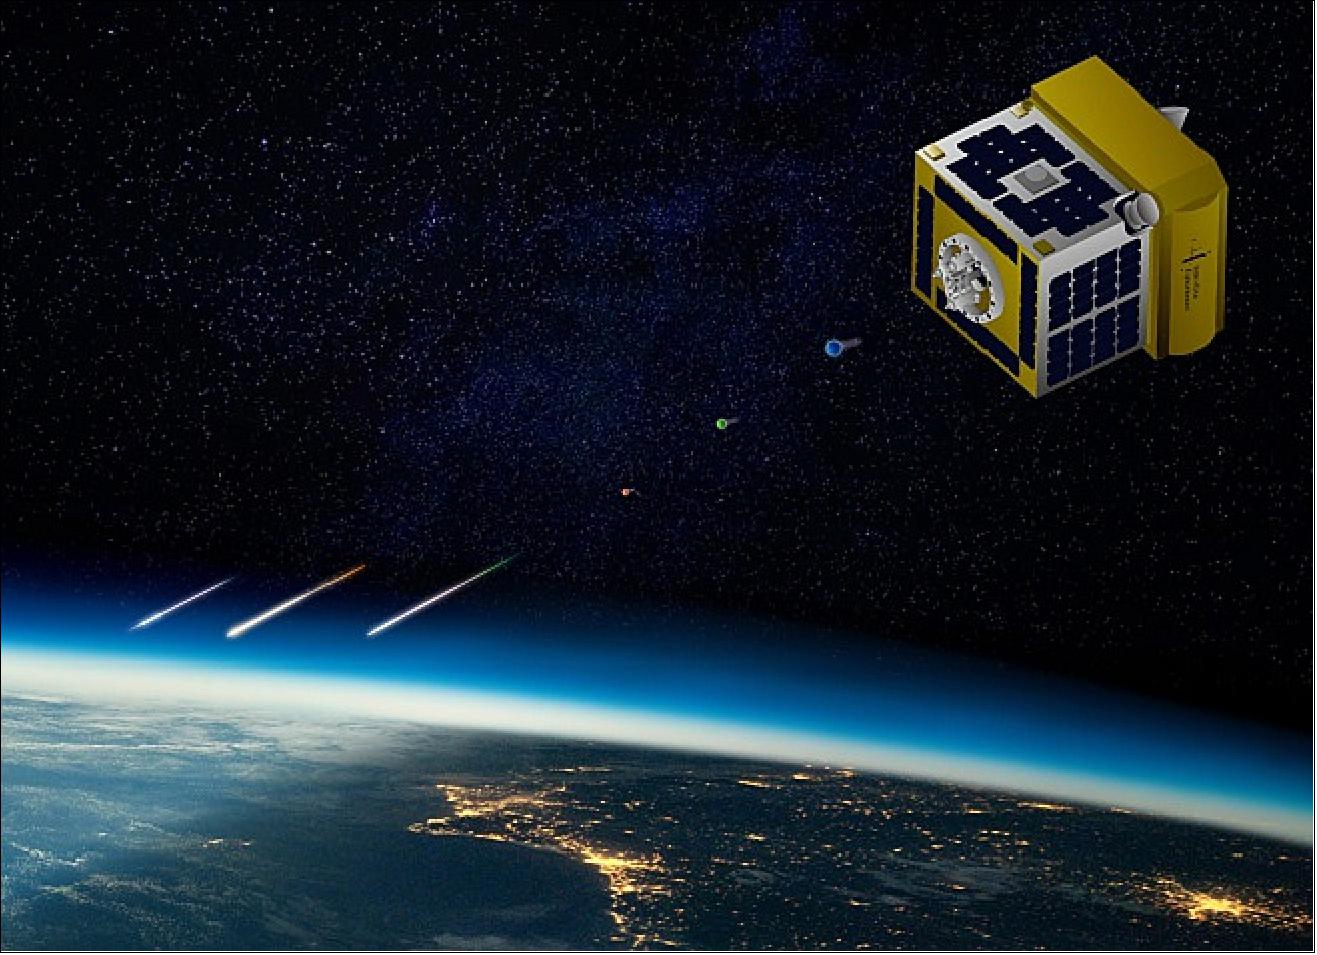 Figure 52: Artist's view of the deployed ALE-2 microsatellite (image credit: ALE) 85)